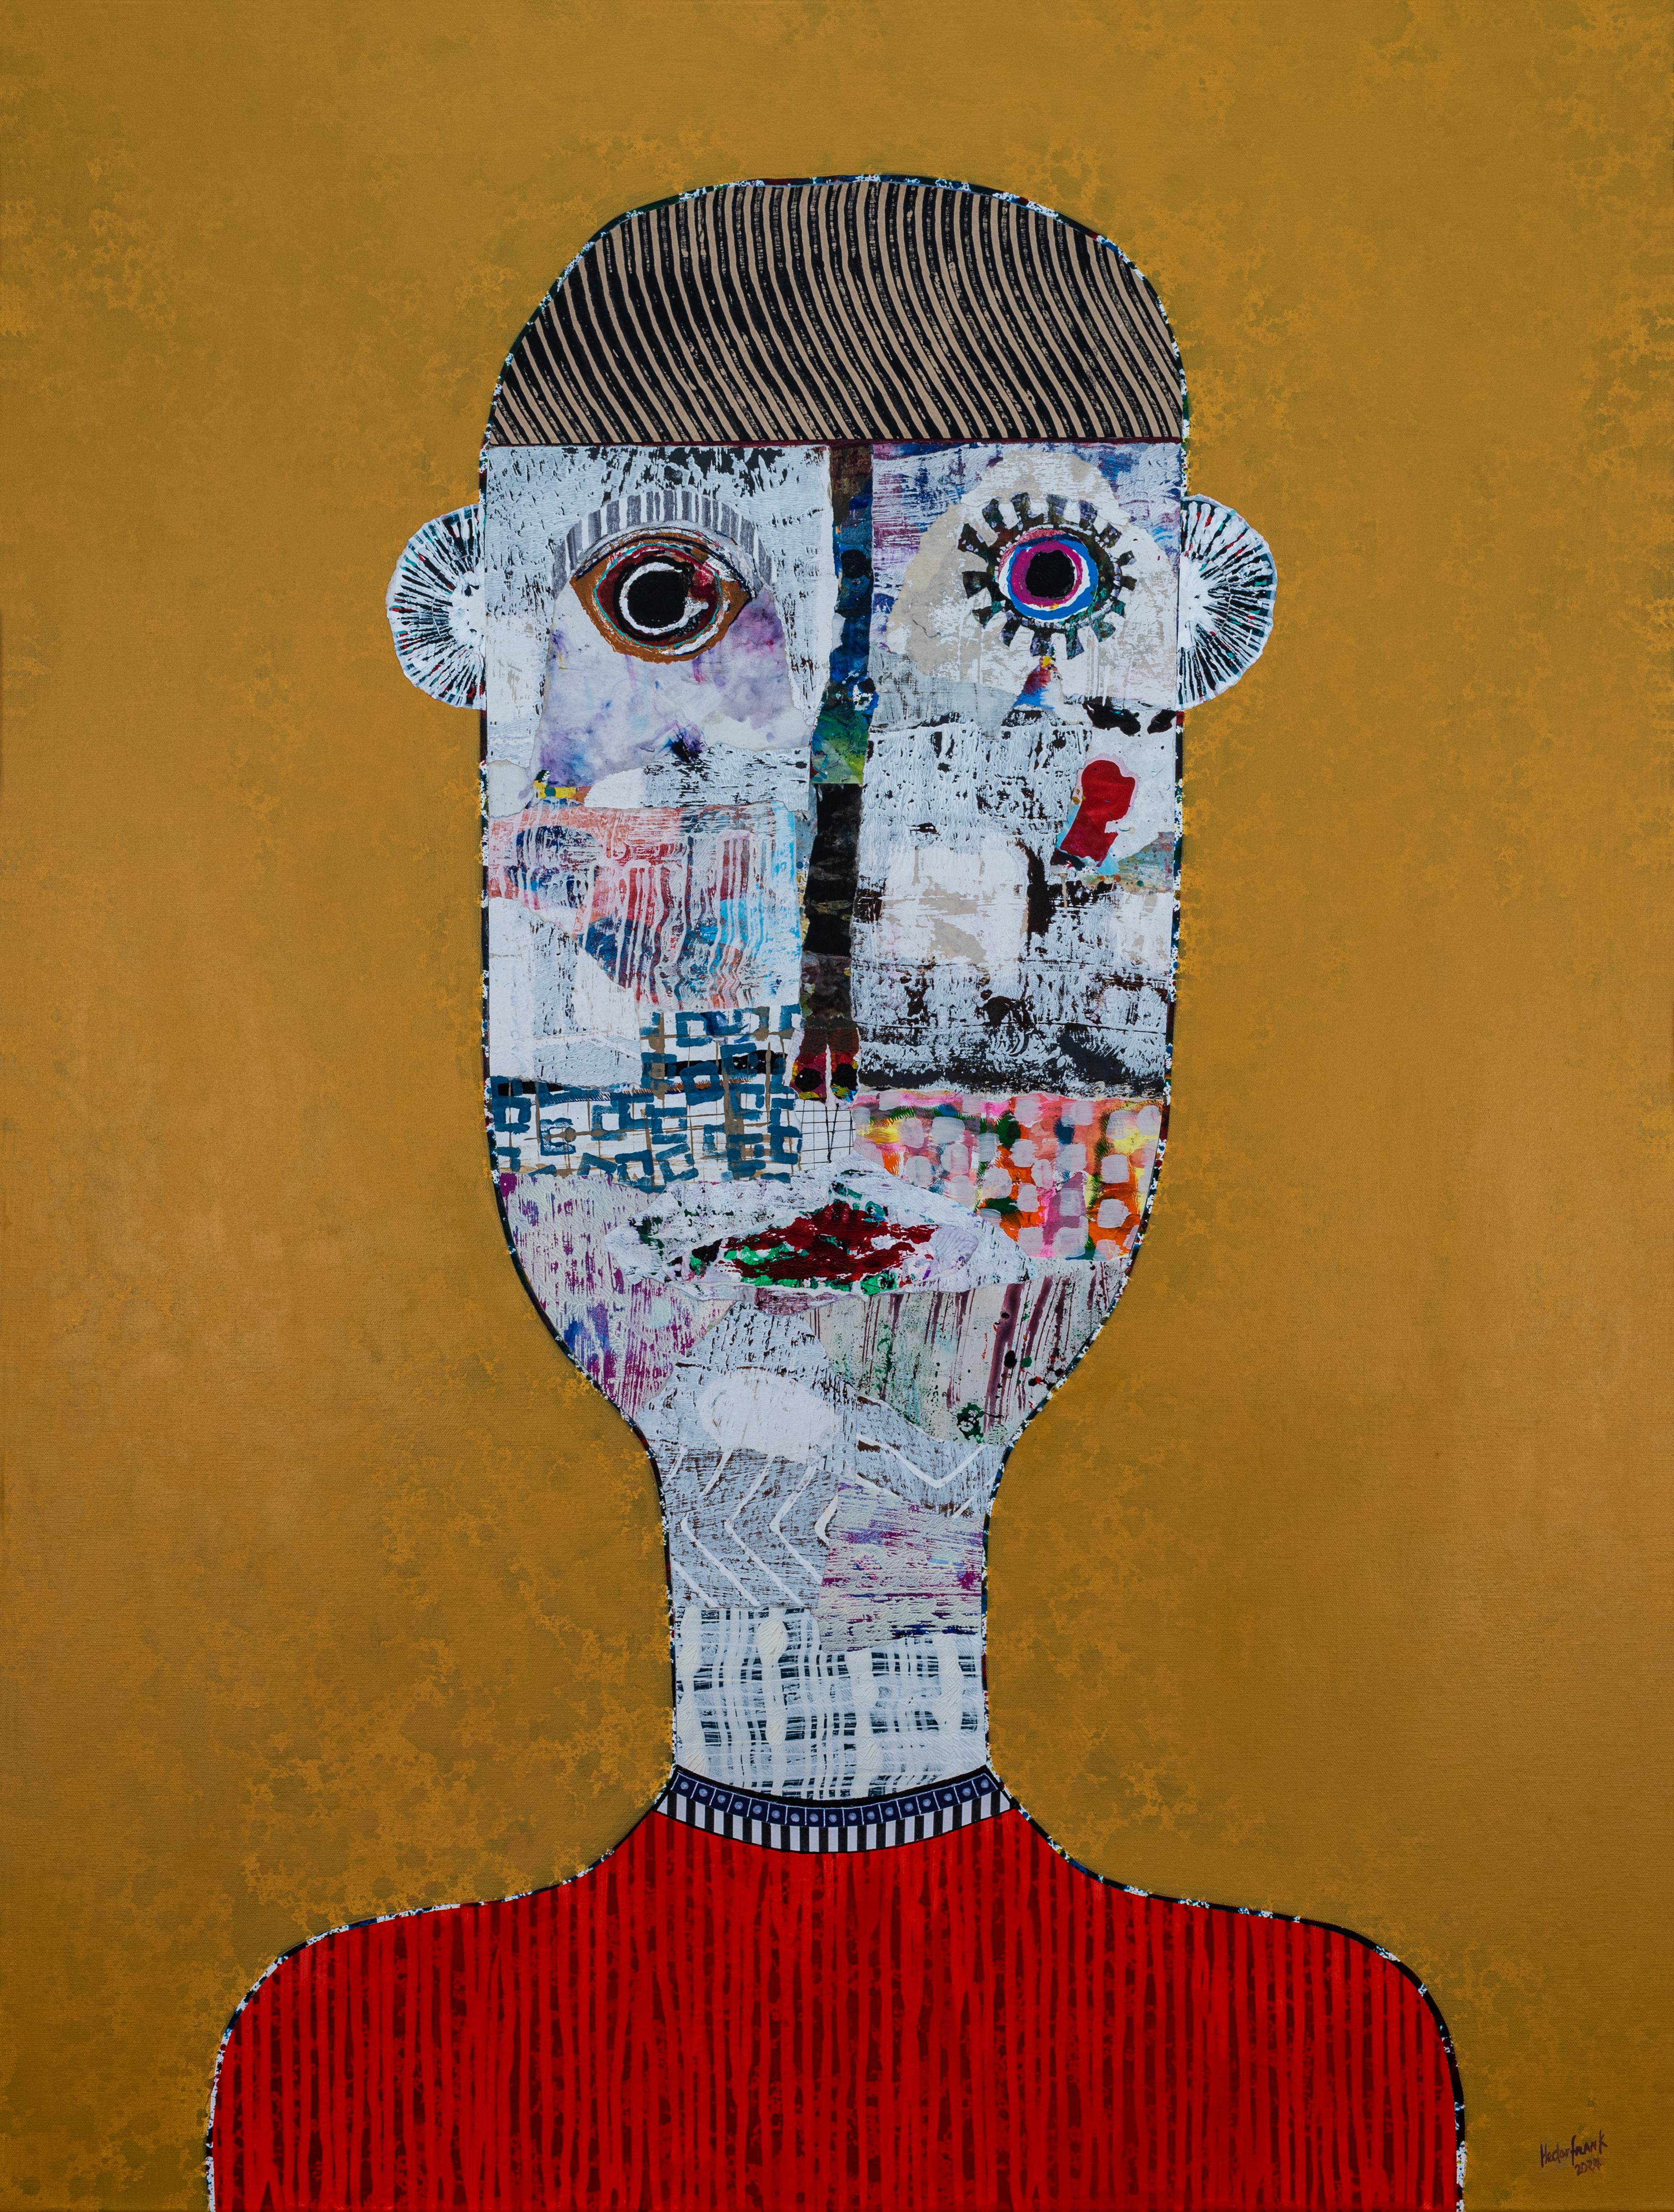 Figurative Pink Mixed Media Portrait Painting by Cuban Artist Hector Frank.

Unique Painting with a certificate of authenticity.

Despite international acclaim as one Cuba’s foremost living artists, Havana born Hector Frank never received a